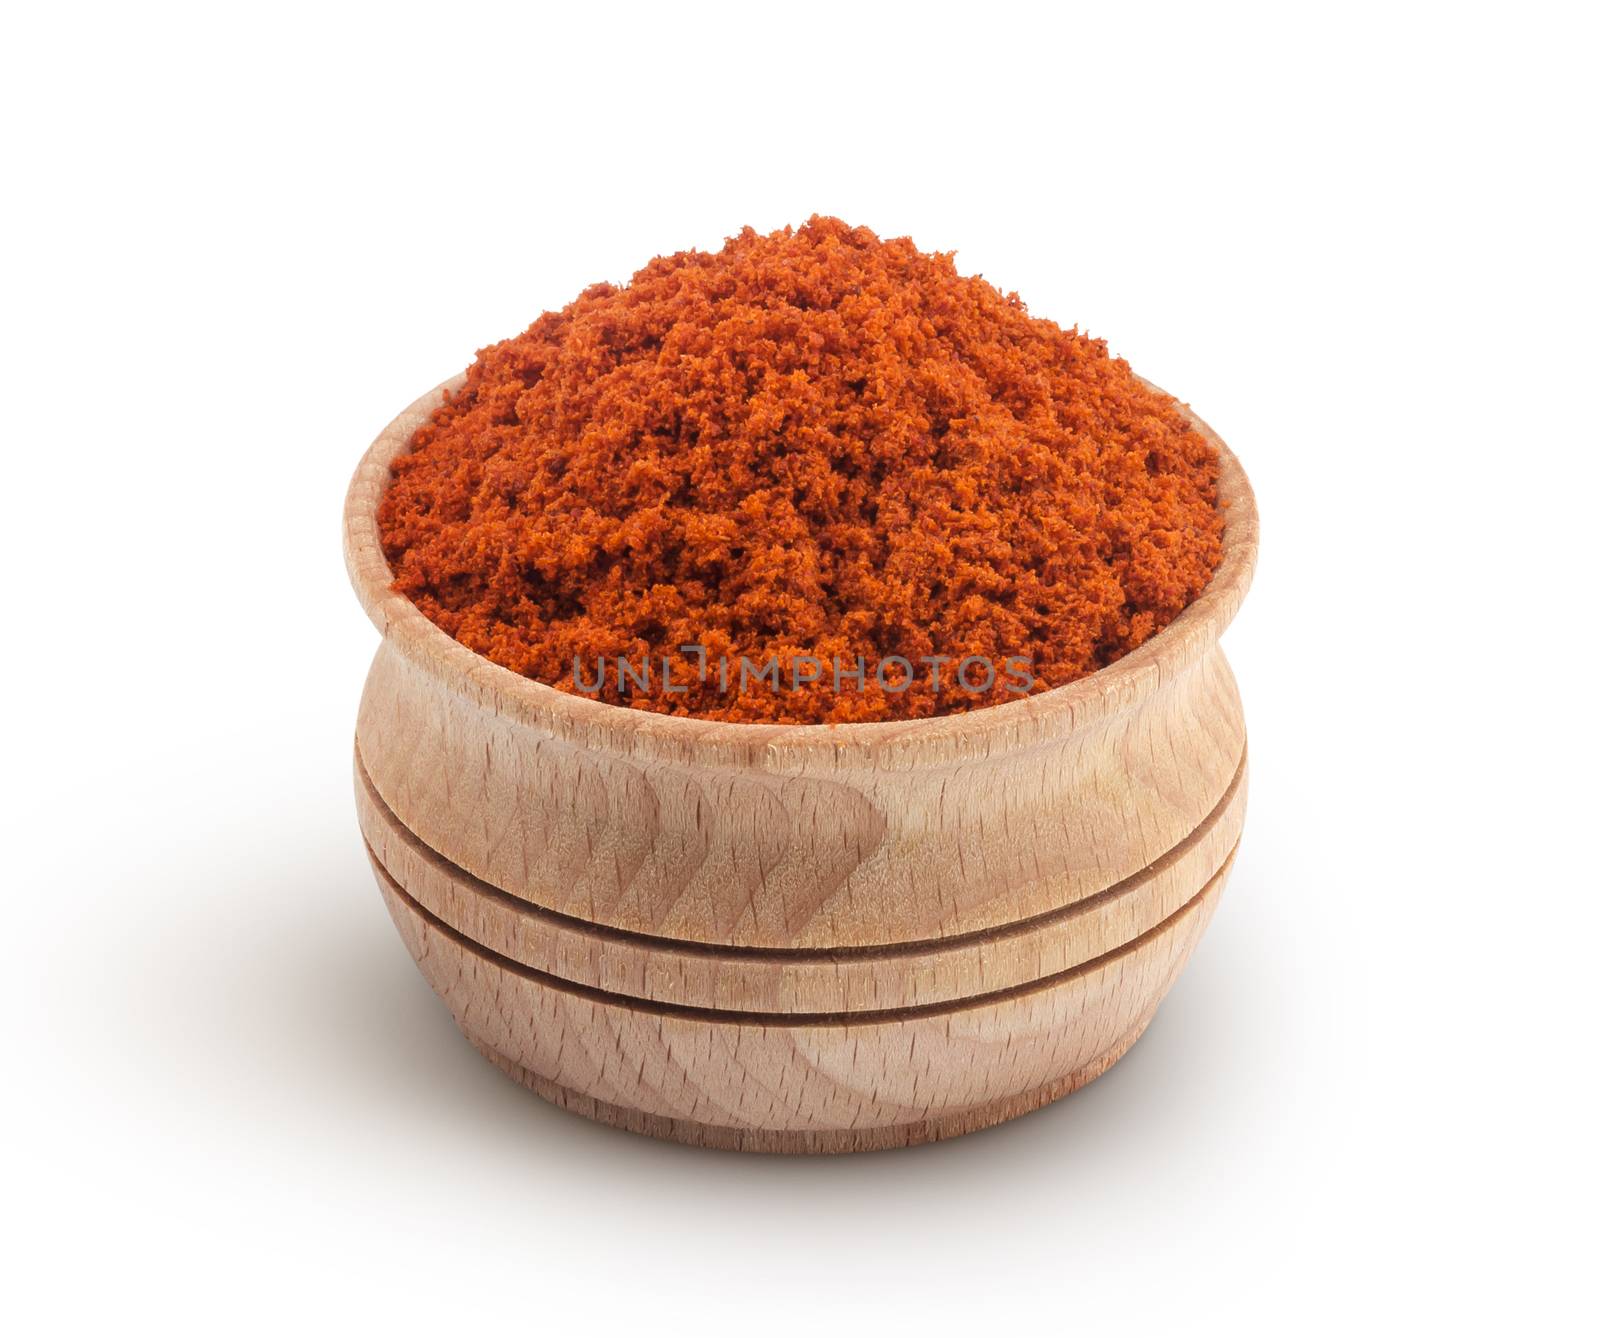 Pile of red paprika powder in wooden bowl isolated on white background